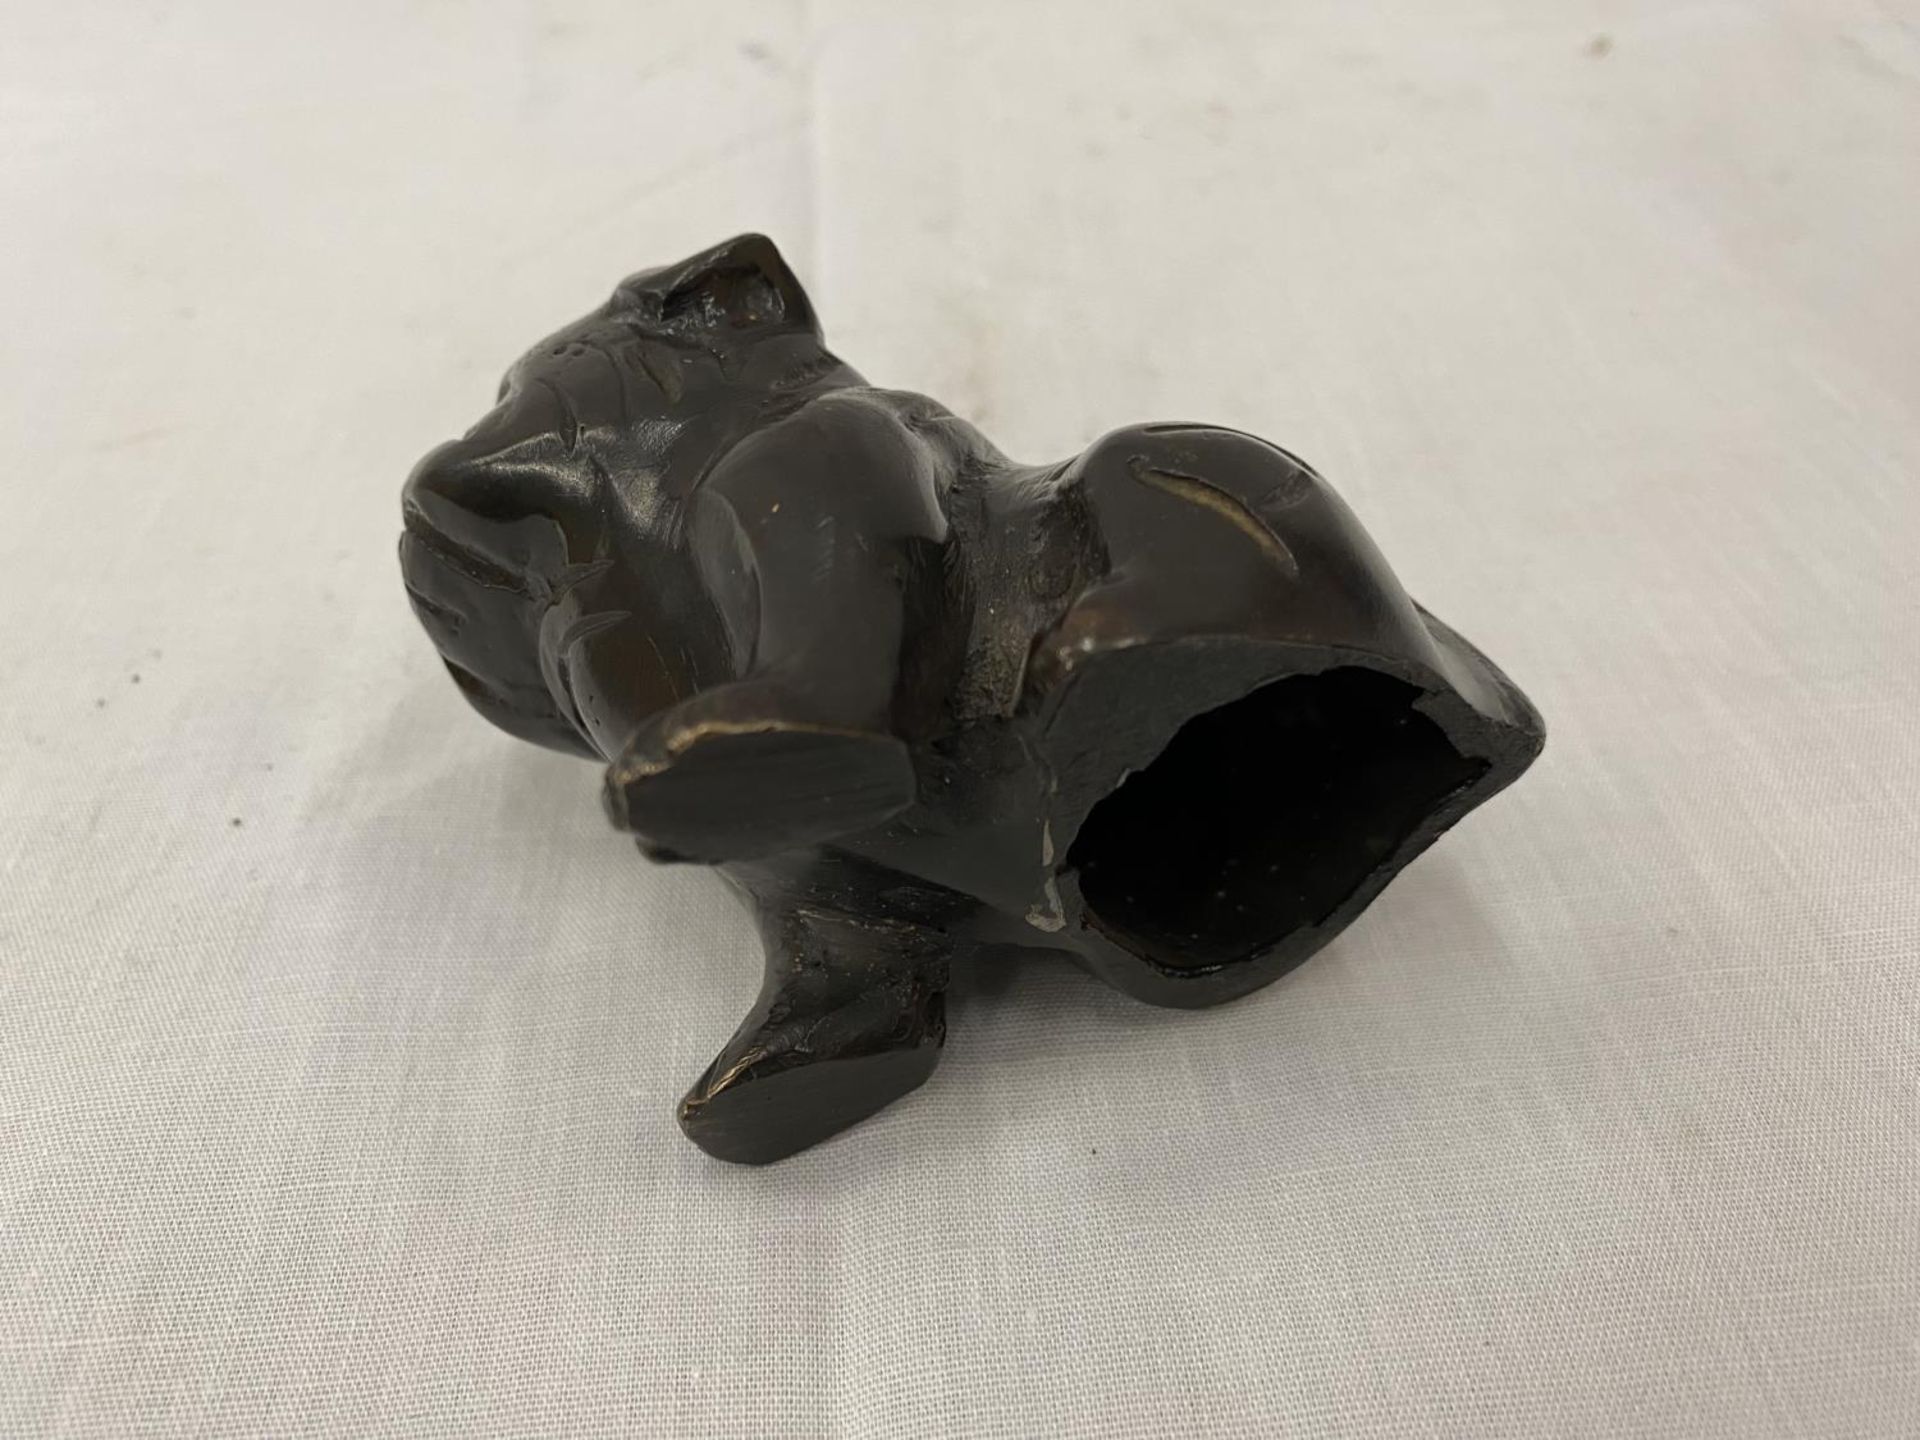 A PAIR OF BRONZE BULLDOGS, ONE SITTING AND ONE LAYING DOWN, HEIGHT 7CM AND 4CM - Image 22 of 22